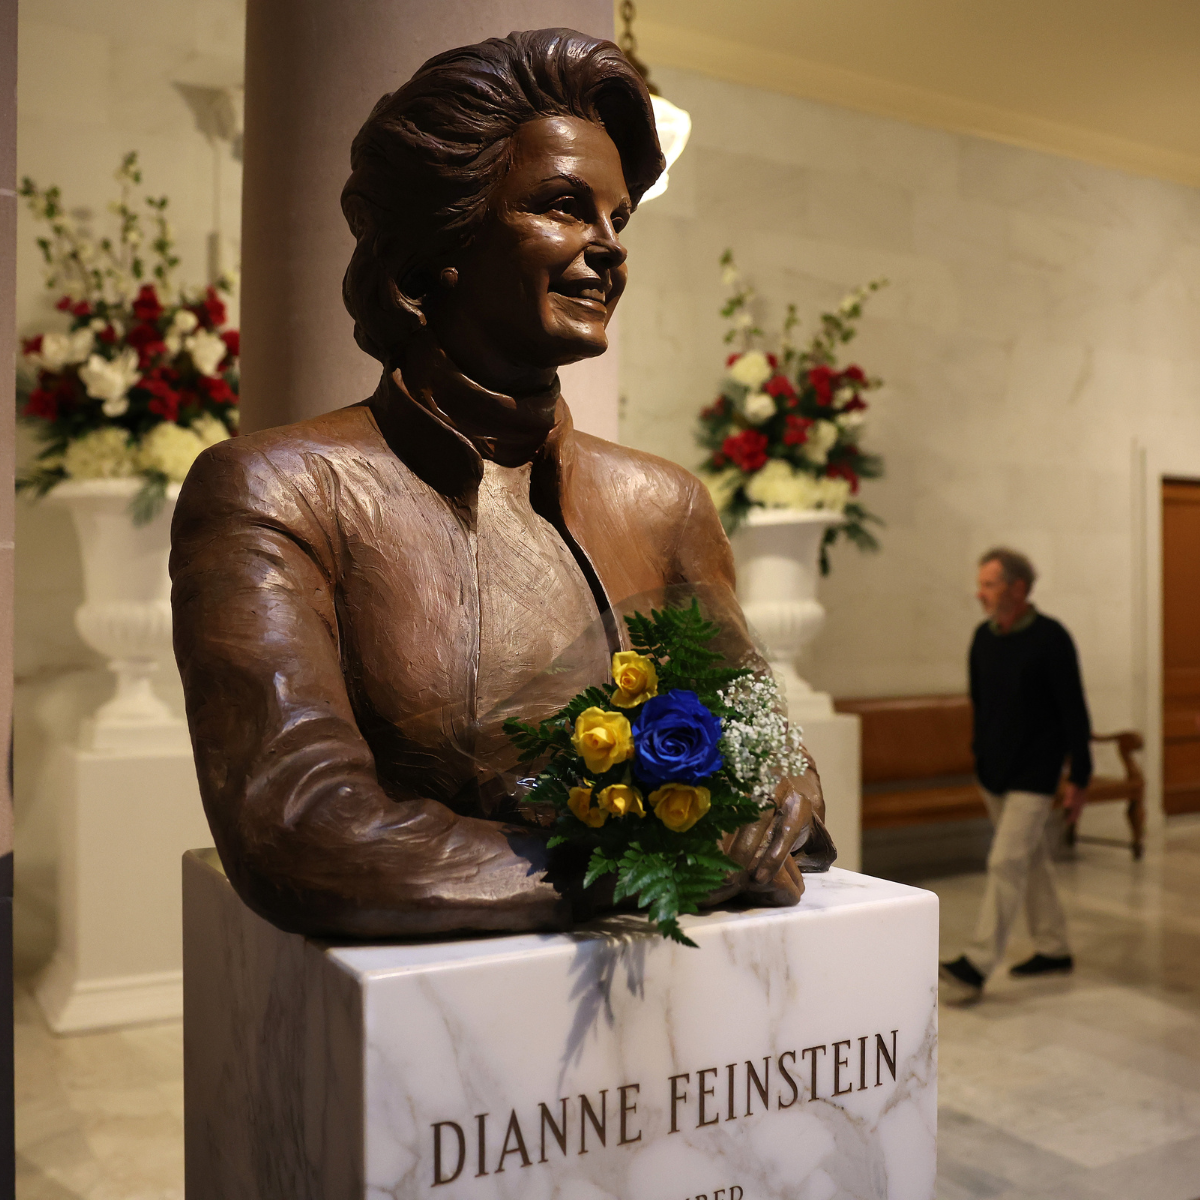 Who will Governor Newsom select to fill Senator Dianne Feinstein's seat?